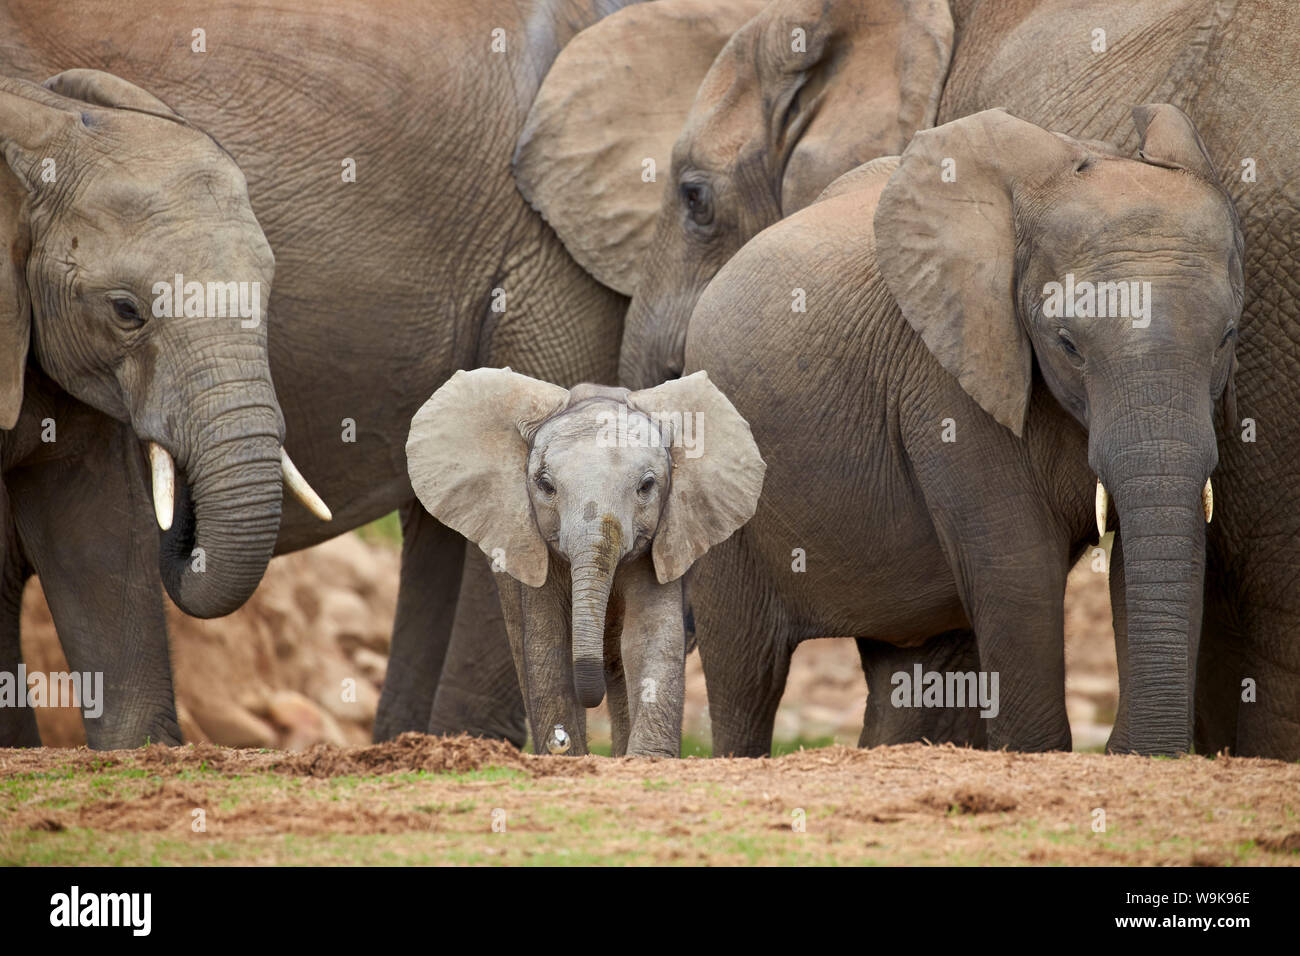 African elephant (Loxodonta africana) group with baby, Addo Elephant National Park, South Africa, Africa Stock Photo